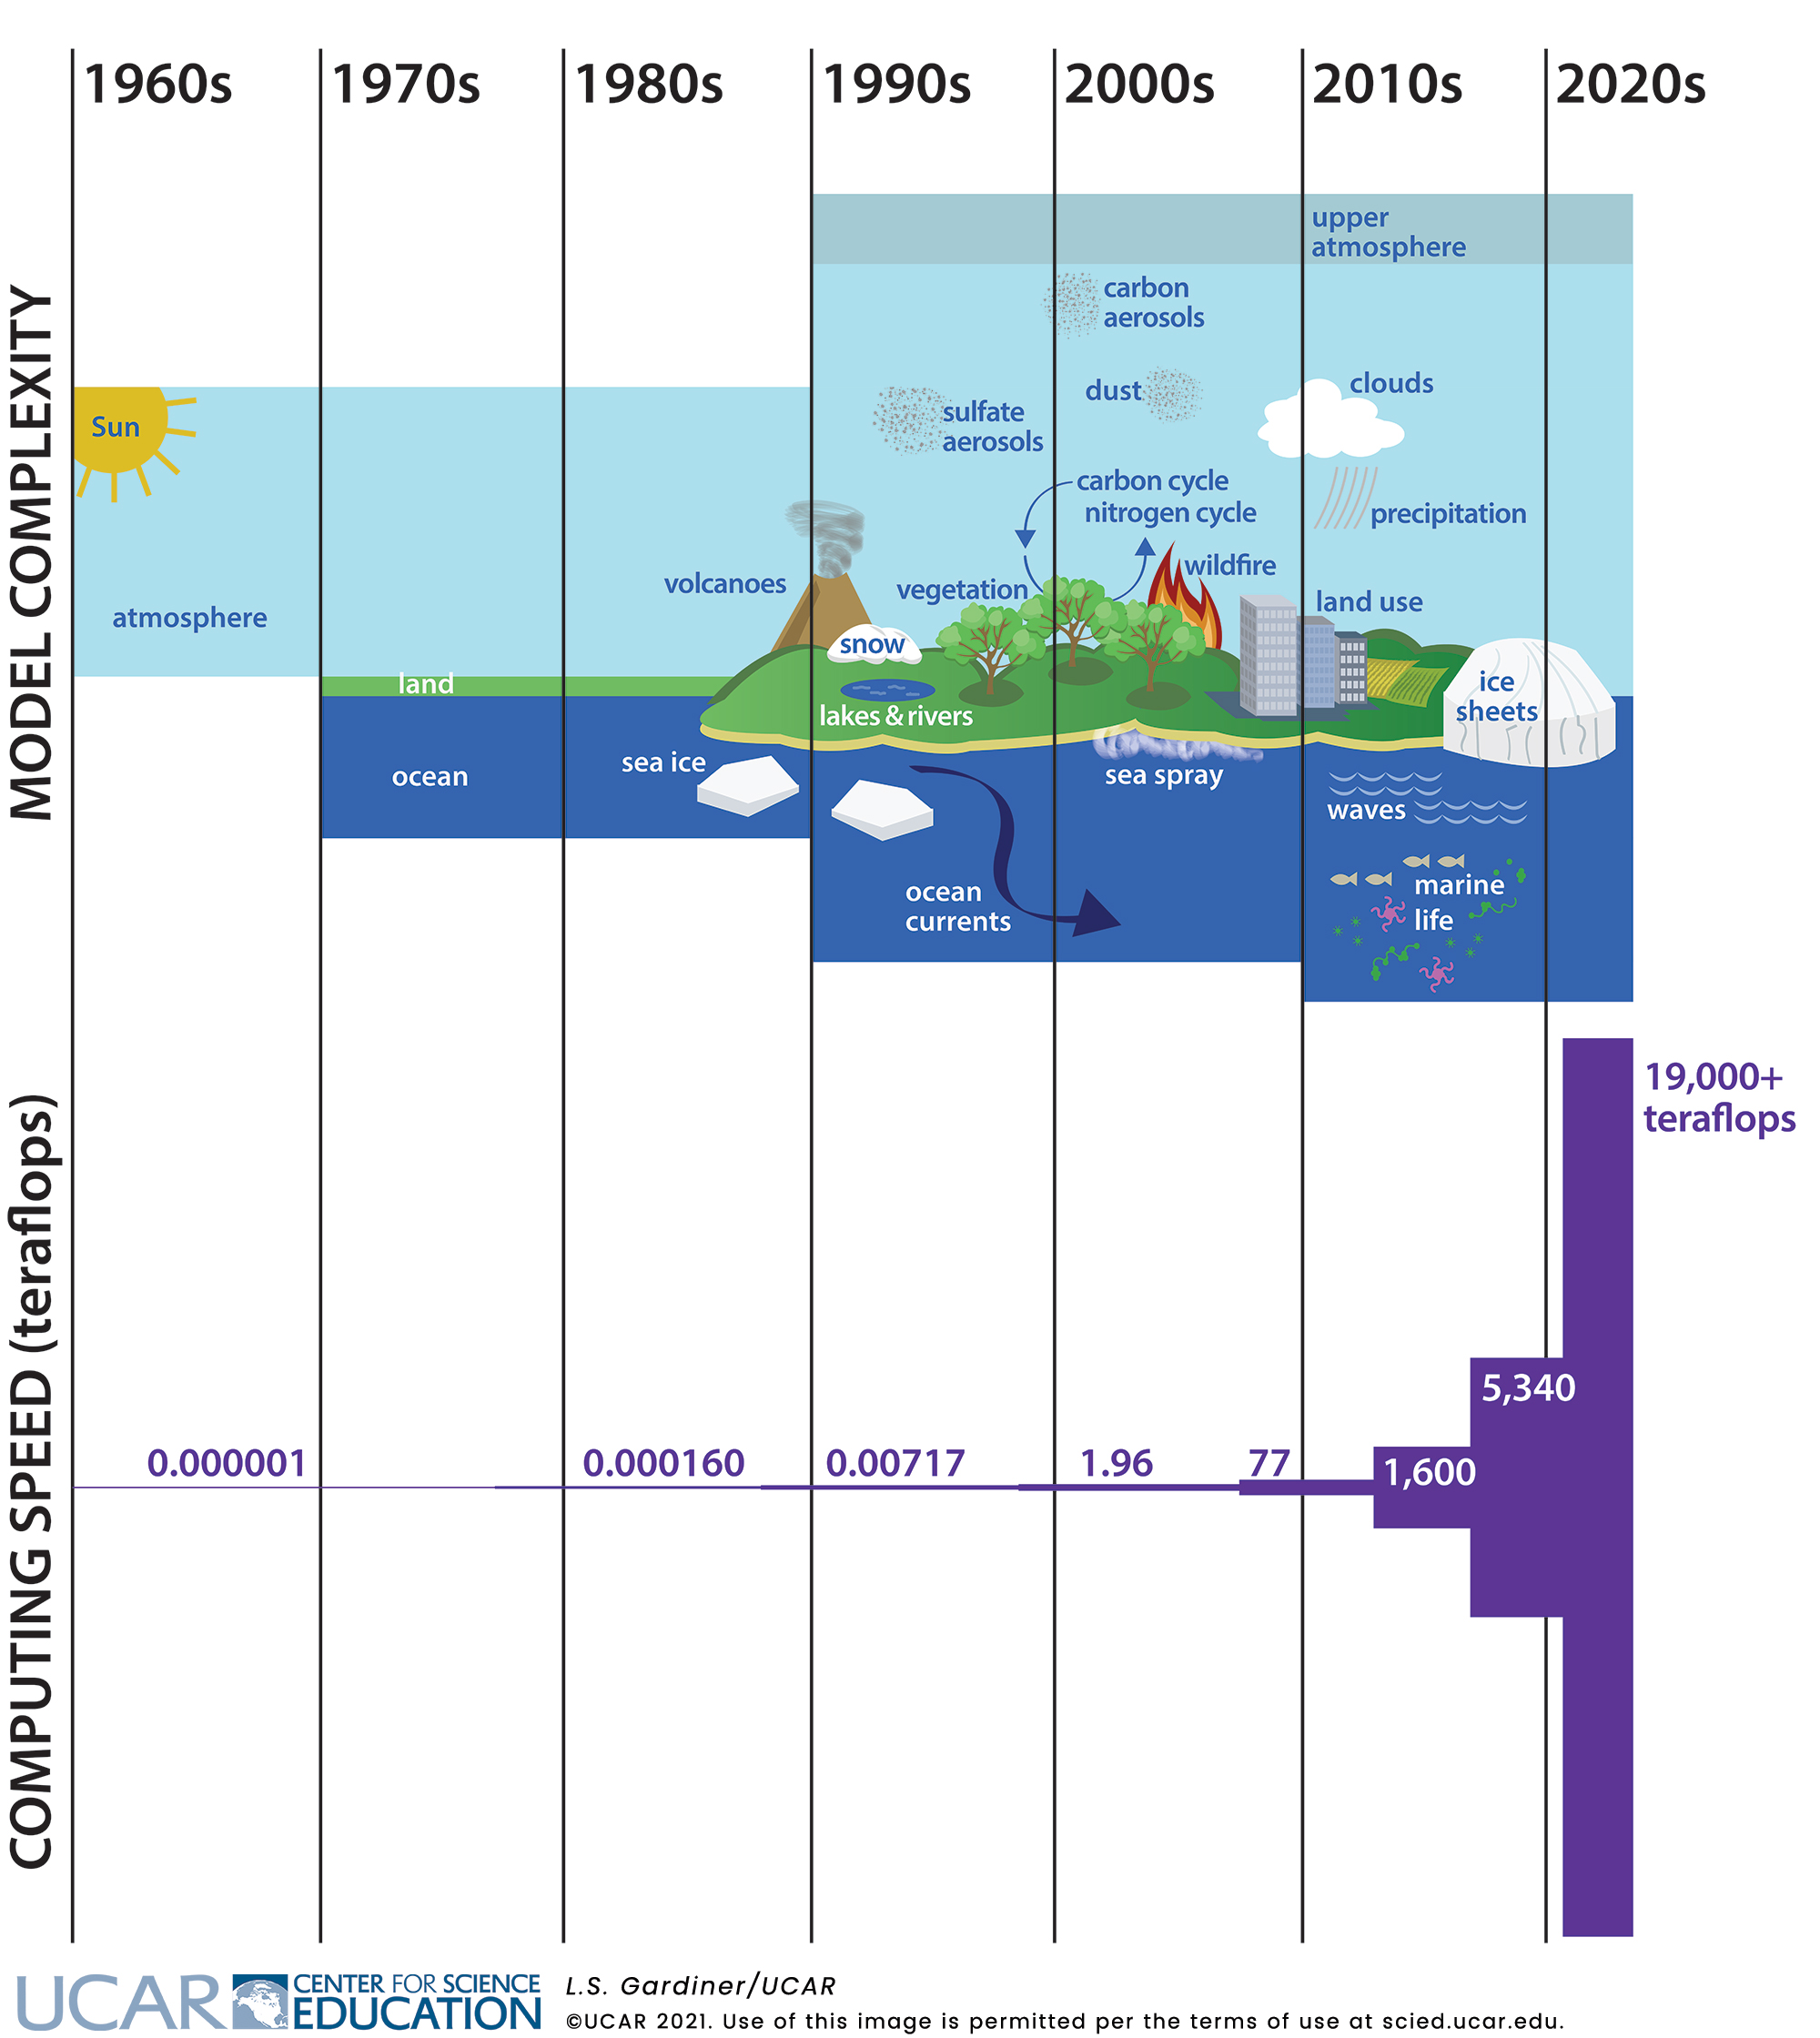 Timeline graphic showing how model complexity and computing speed has increased the 1960s (.000001 teraflops with models about the sun and atmosphere) to the 2020s (19,000+ teraflops with models that include the layers of the atmosphere, aerosols, clouds, Earth system cycles, ocean systems, and ice)